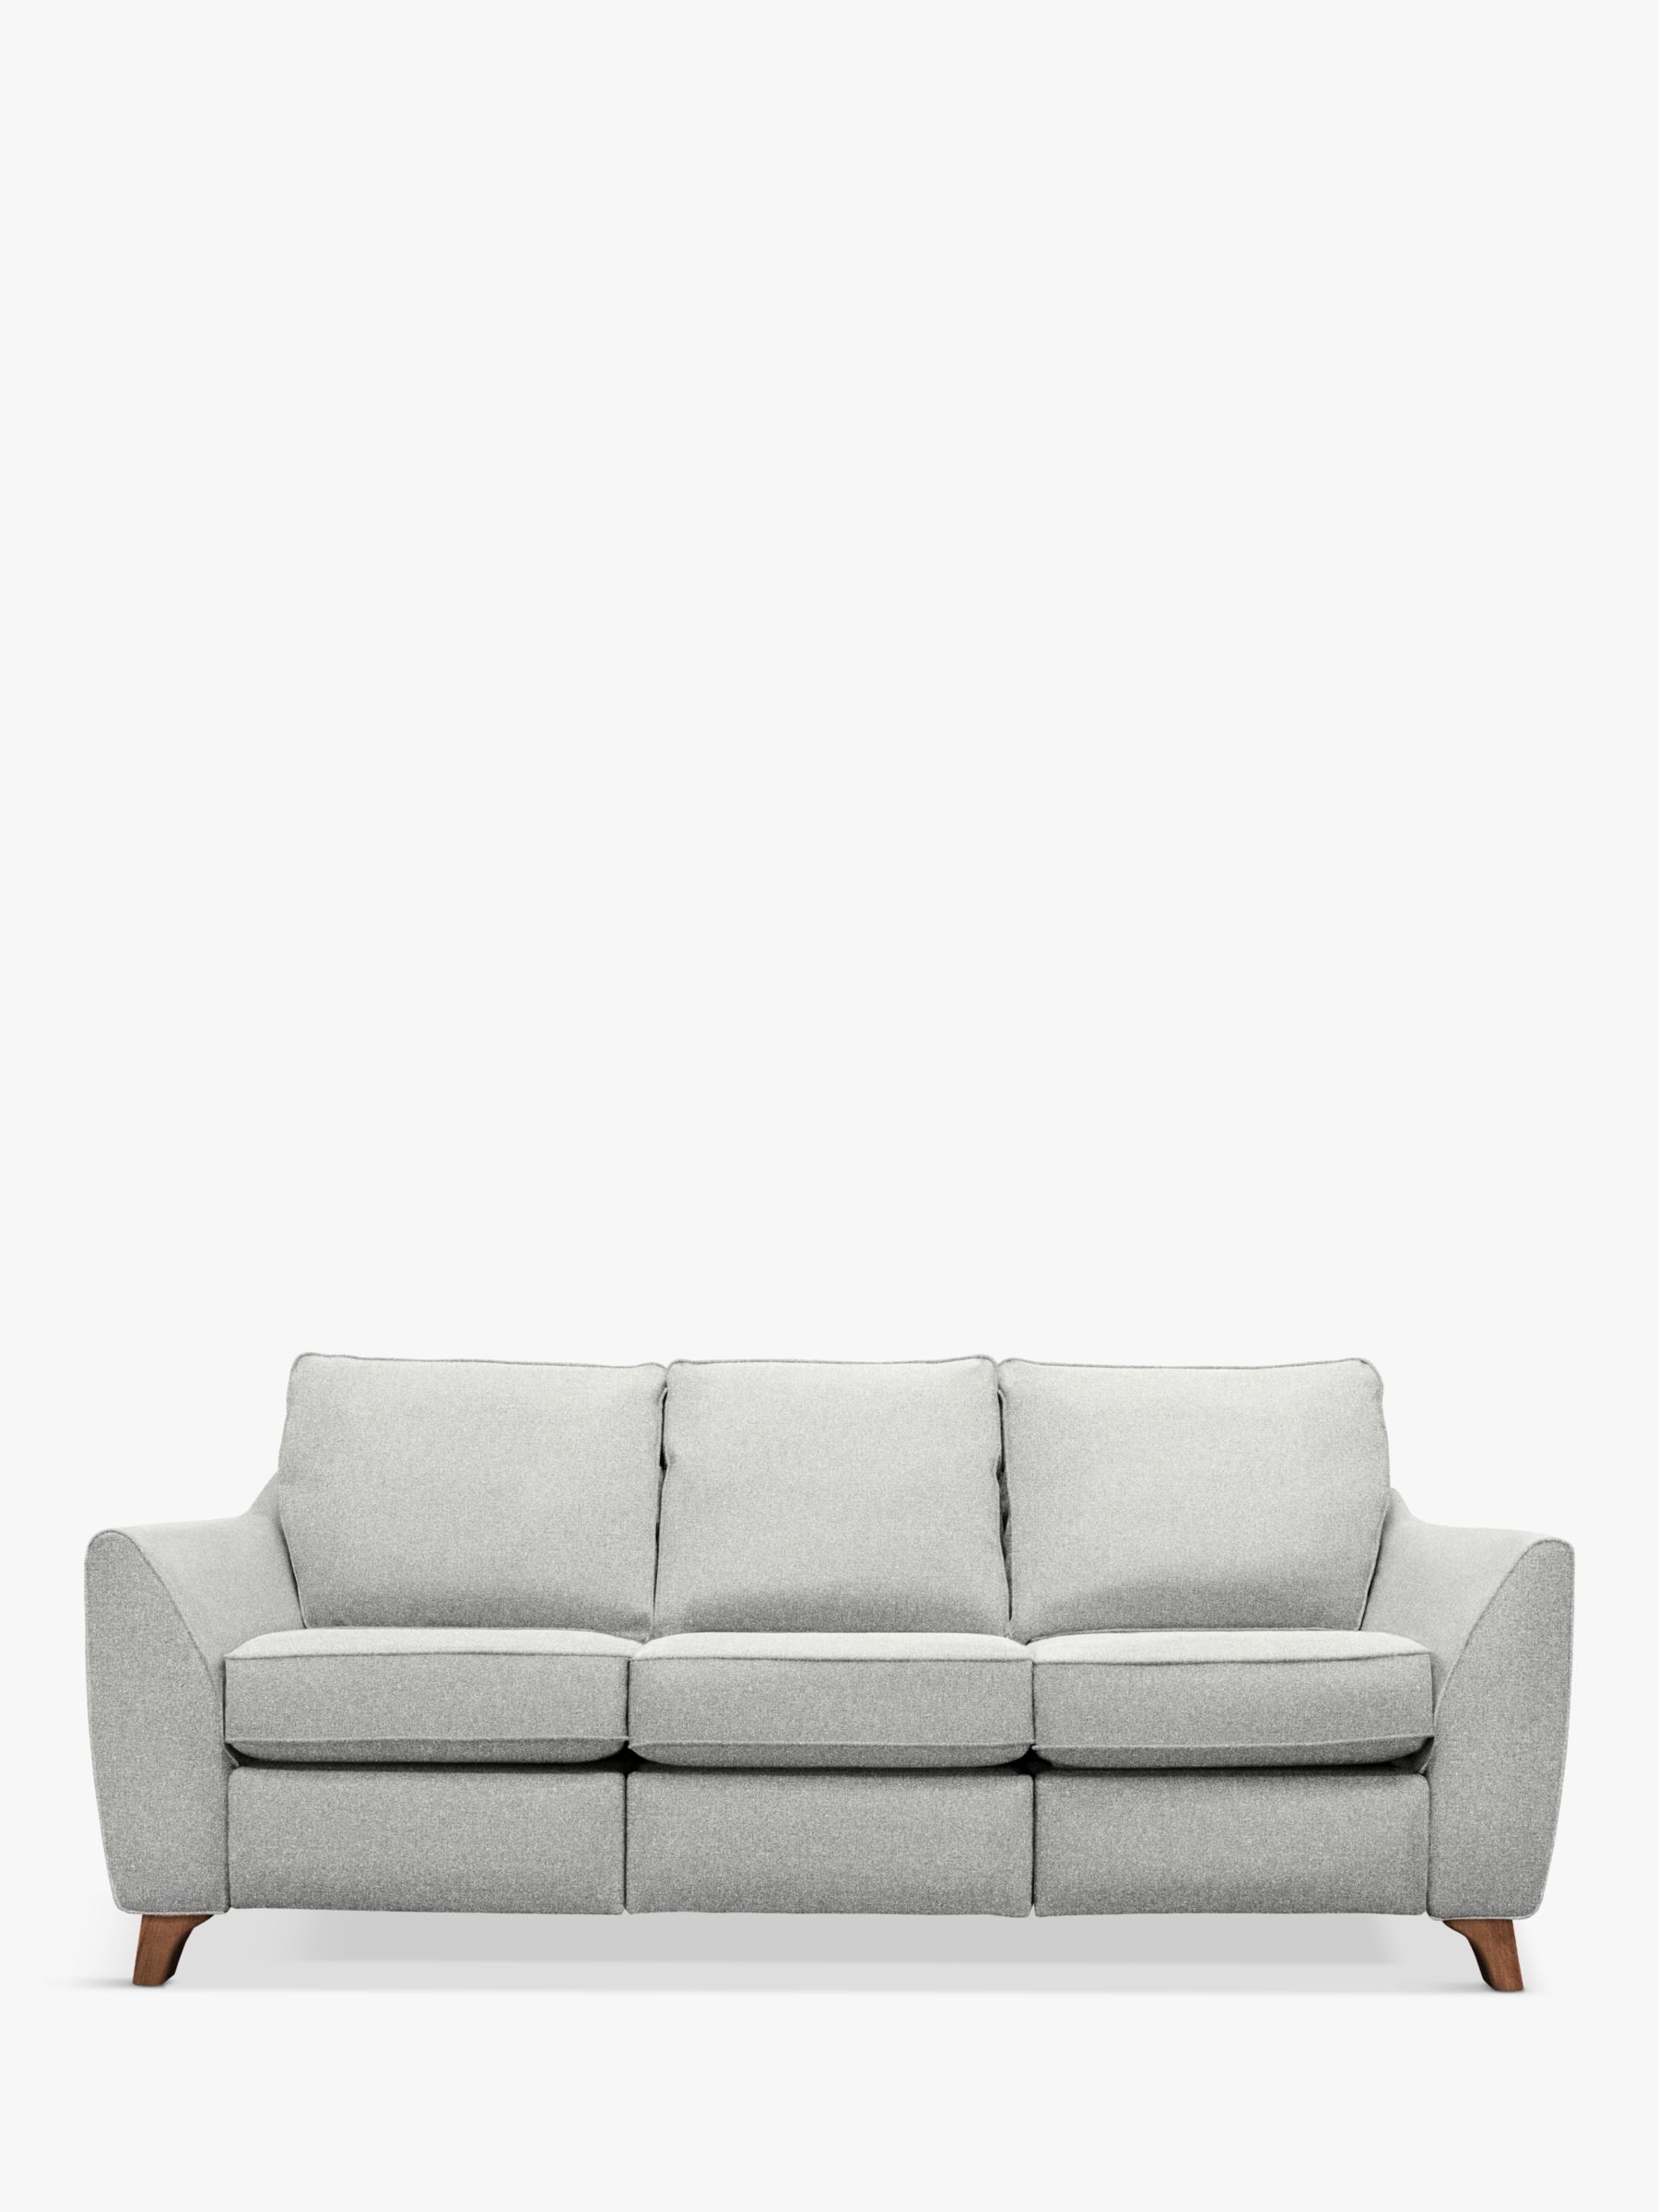 The Sixty Eight Range, G Plan Vintage The Sixty Eight Large 3 Seater Sofa, Tweed Cloud